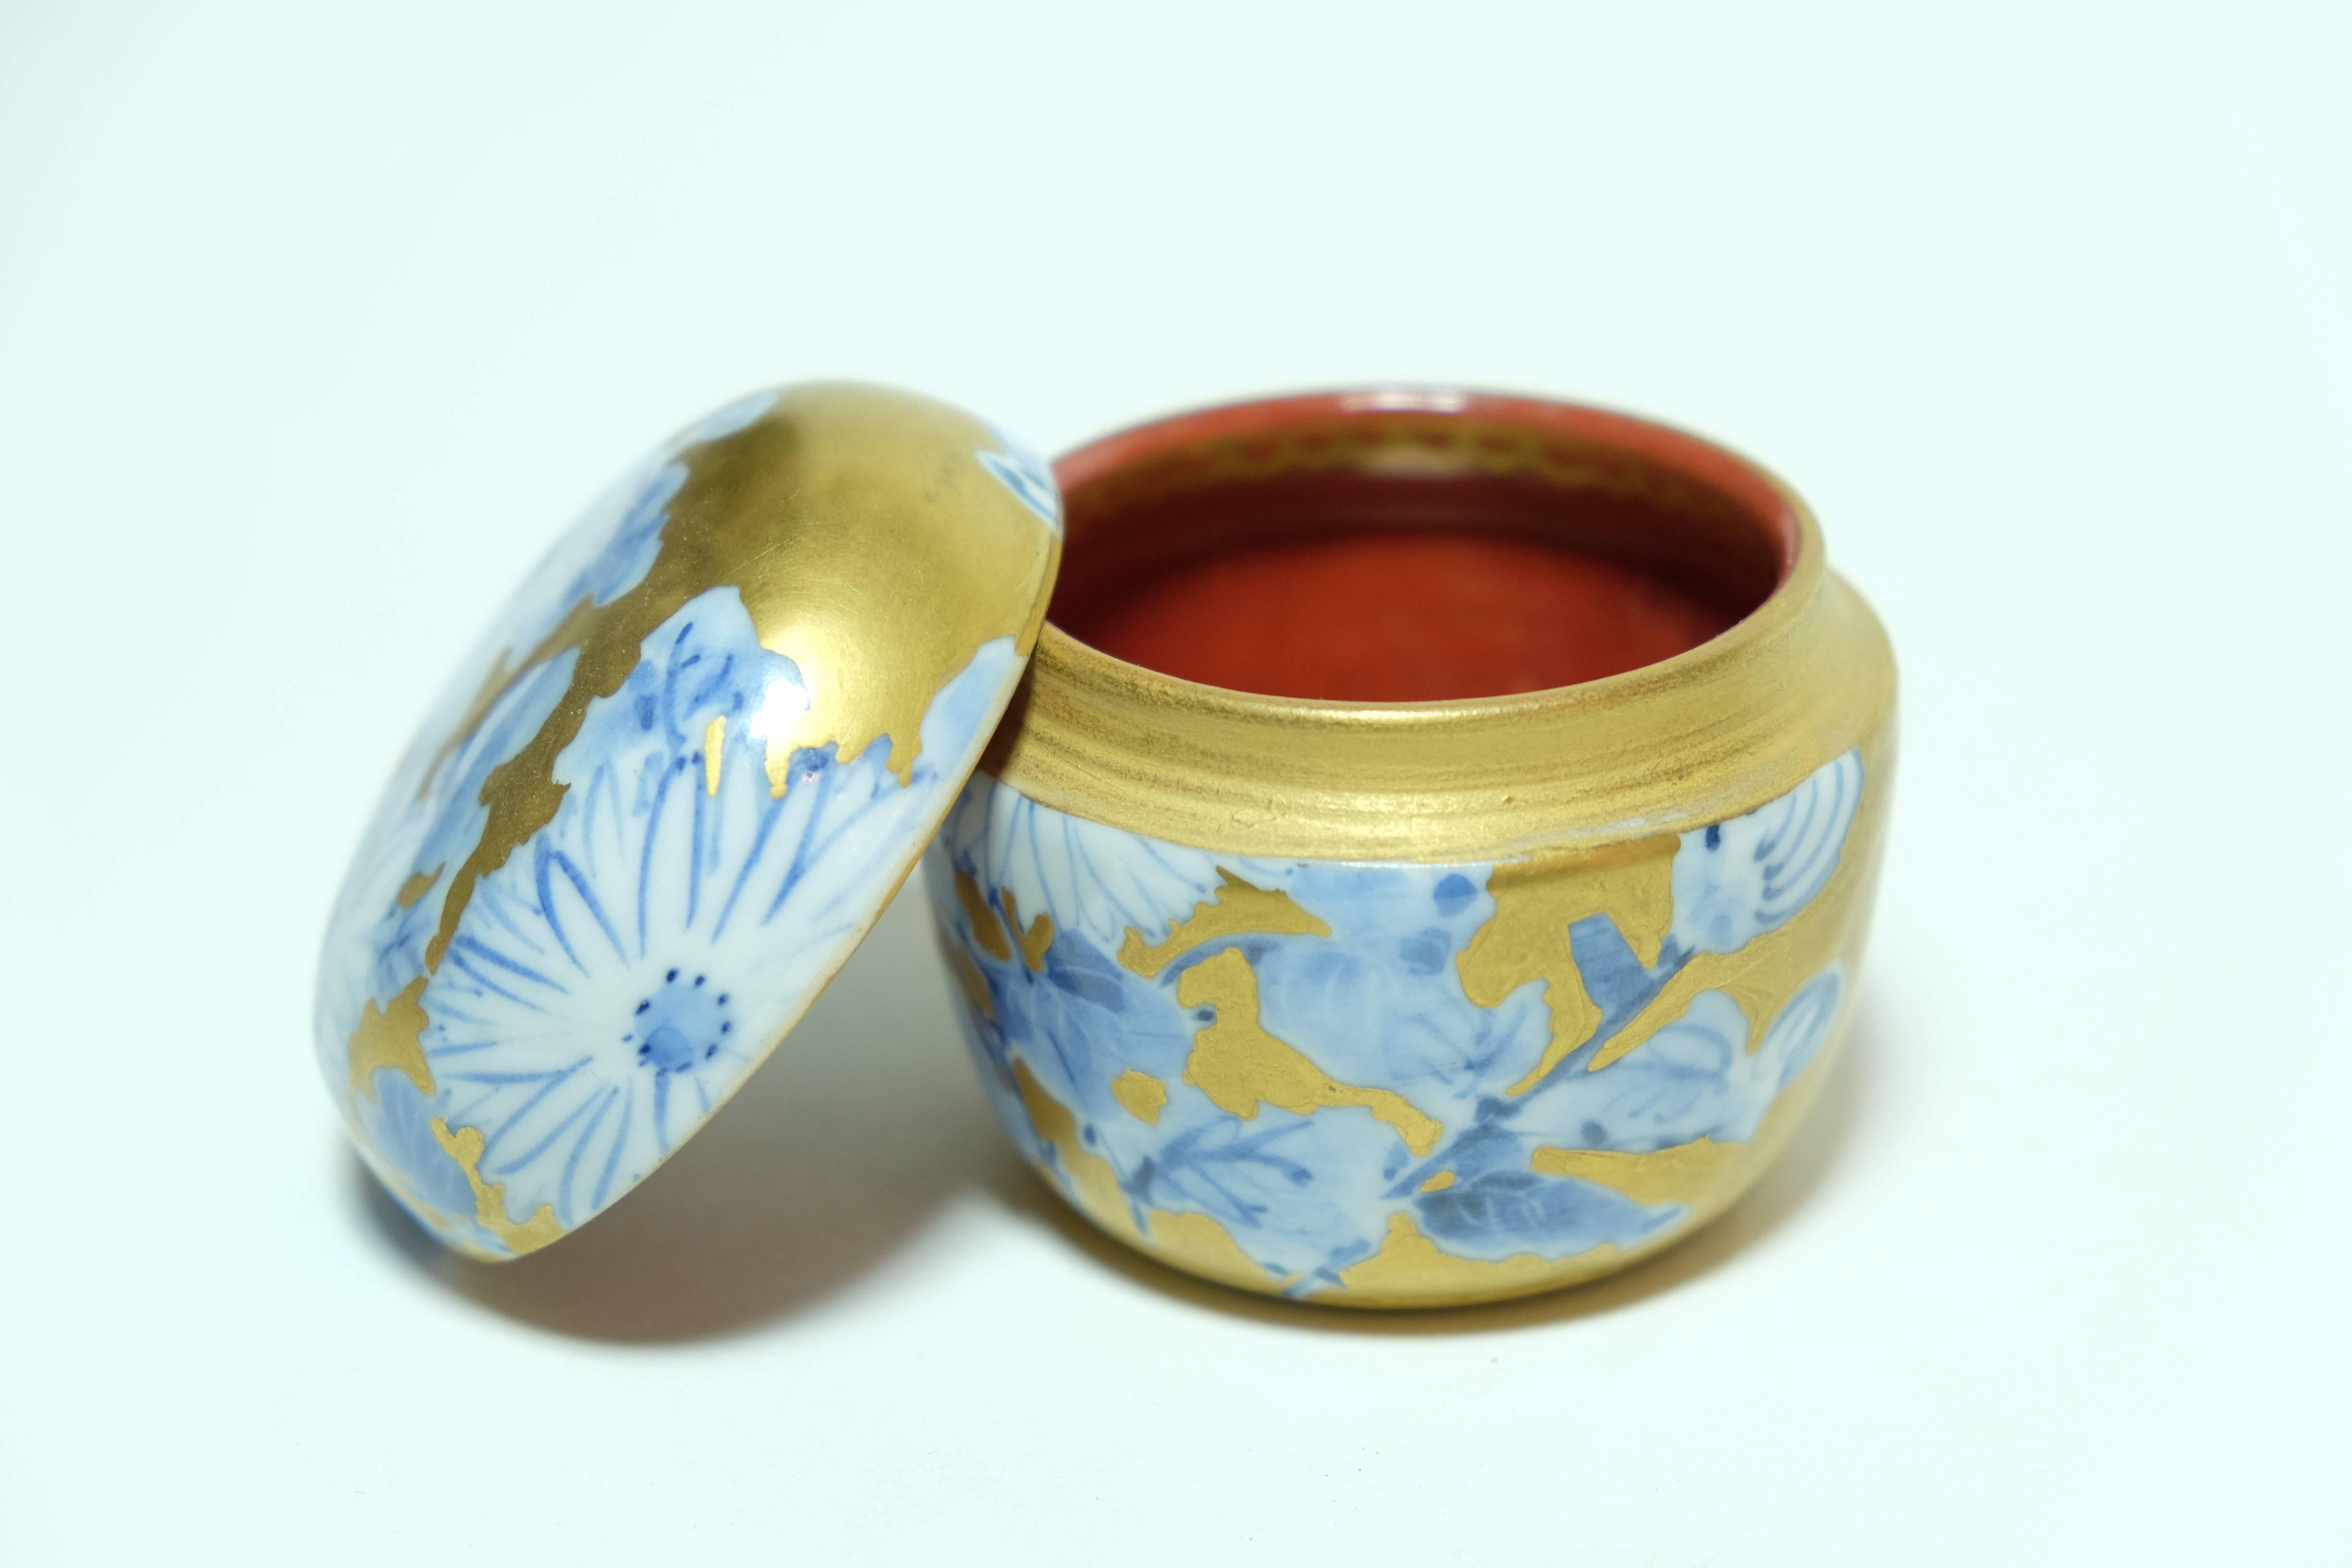 Kutani Ware small tea caddies (Natsume) by Kiyo Hasegawa with wooden box.
The basic characteristic is gold color with blue and white flowers these are very beautiful.
the inside is colored with red painted patterns with gold color.
Kiyo Hasegawa, is